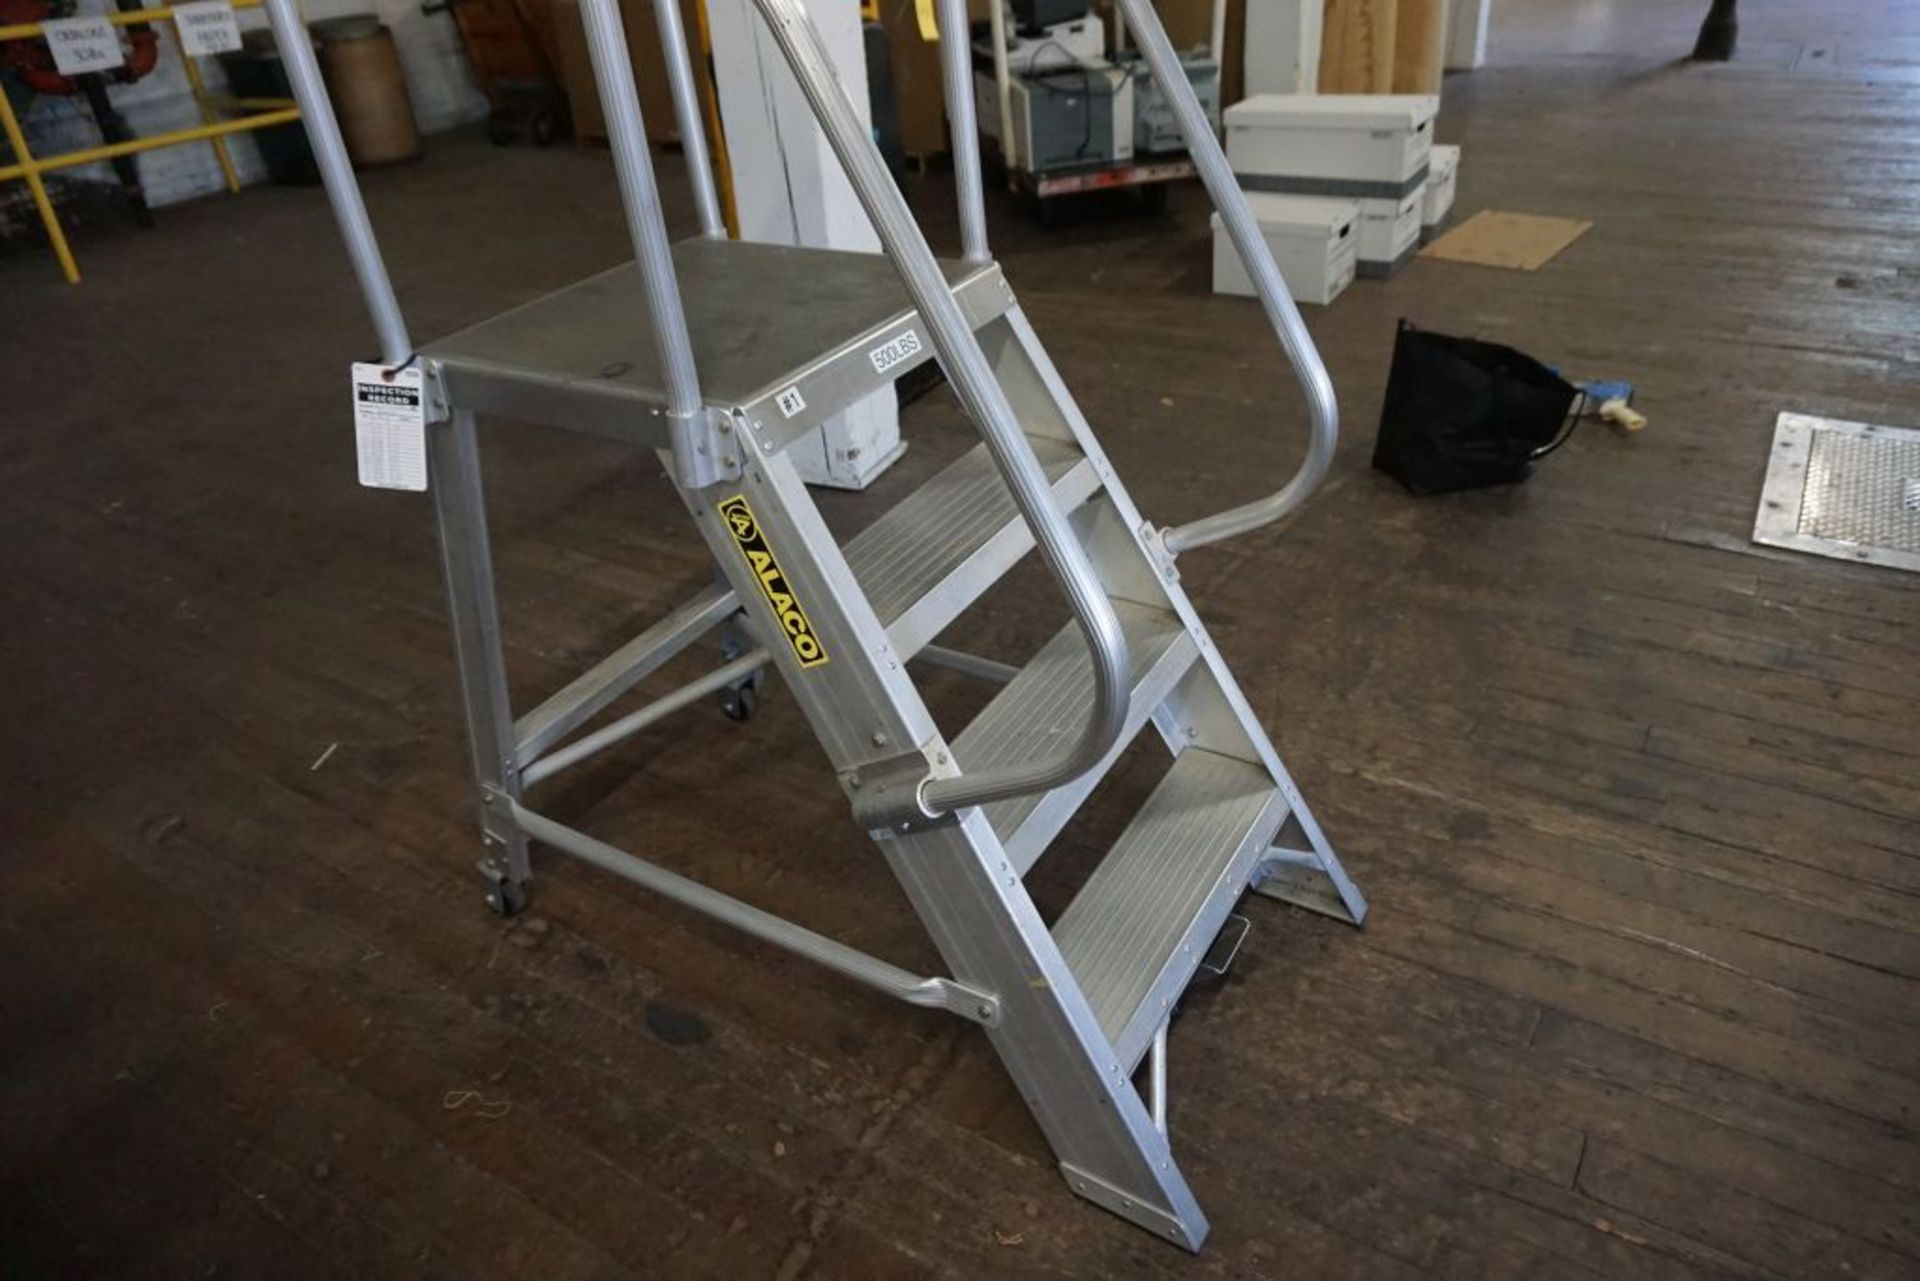 Alaco Portable Stairs|36" Platform Height|Lot Tag: 1052 - Image 2 of 4